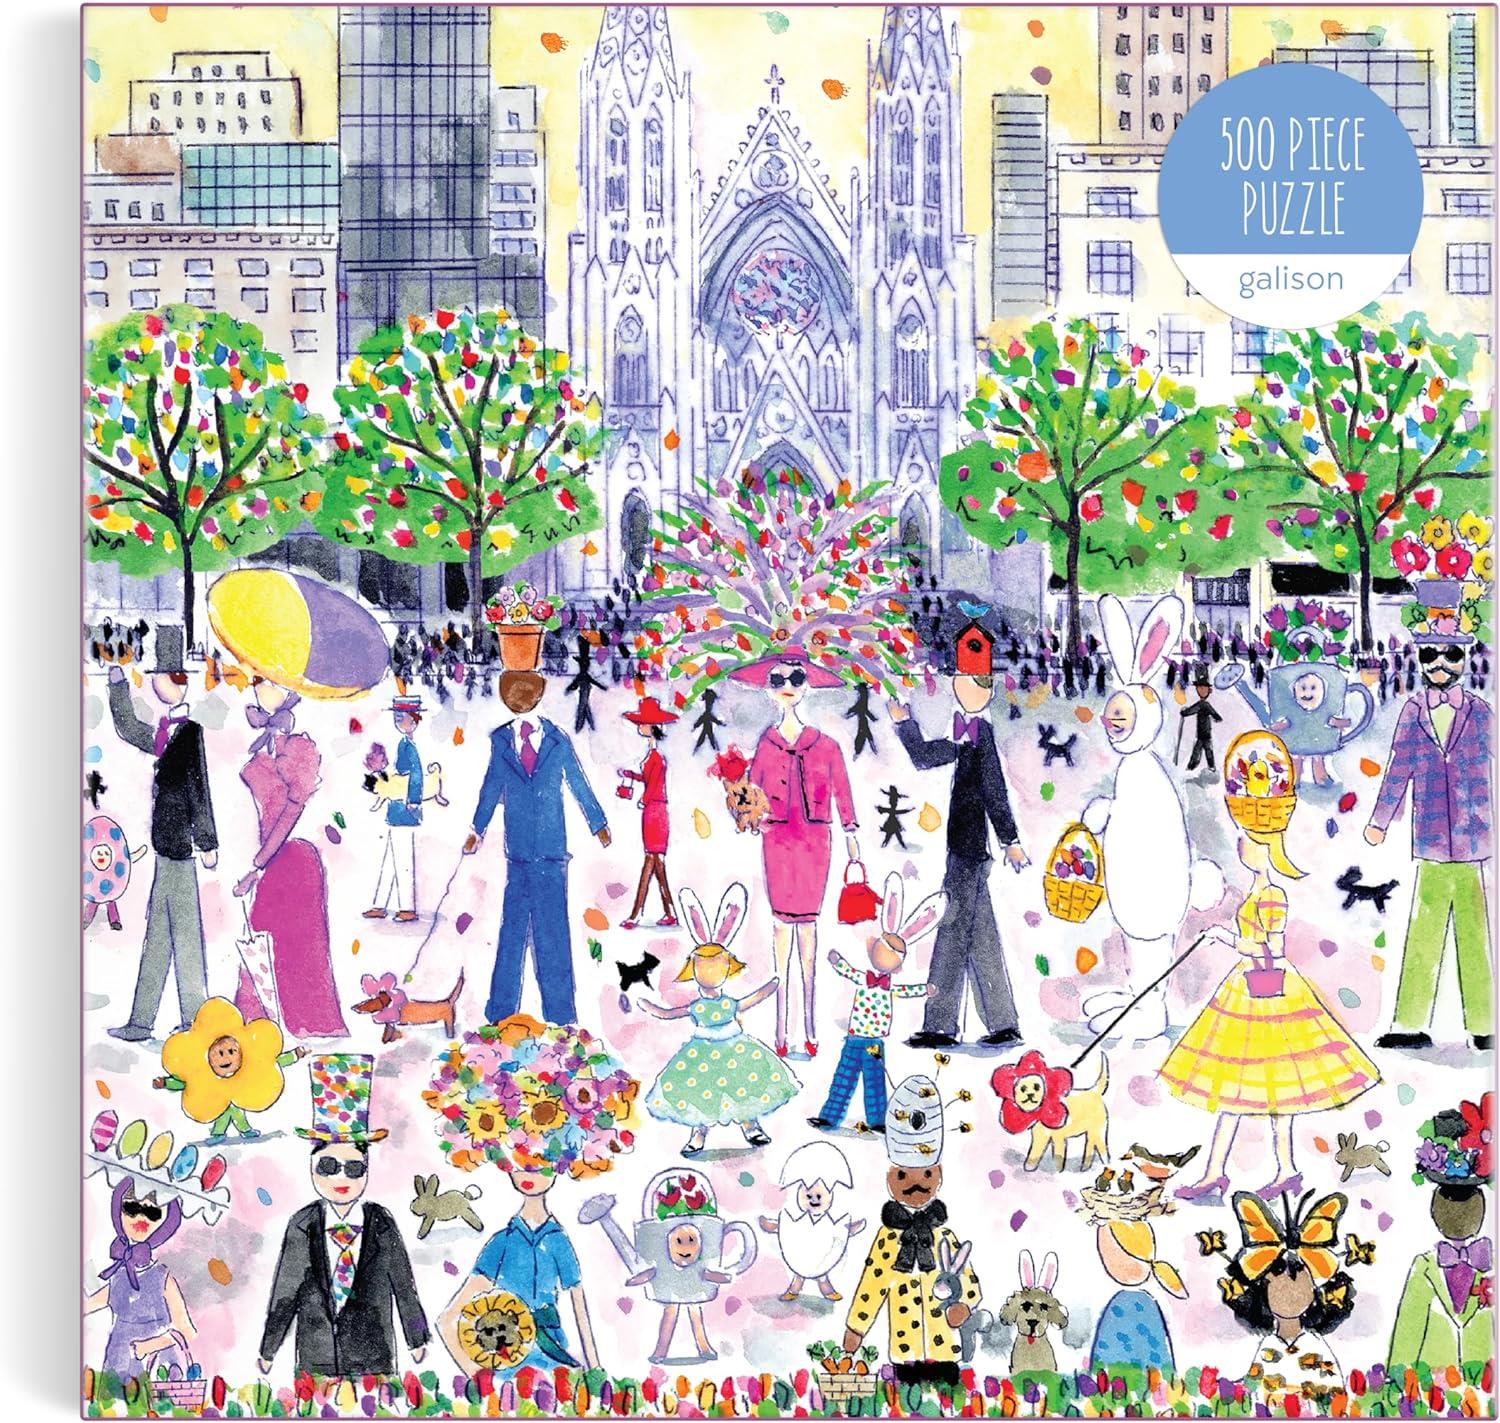 Galison Easter Parade, Michael Storrings Jigsaw Puzzle (500 Pieces)